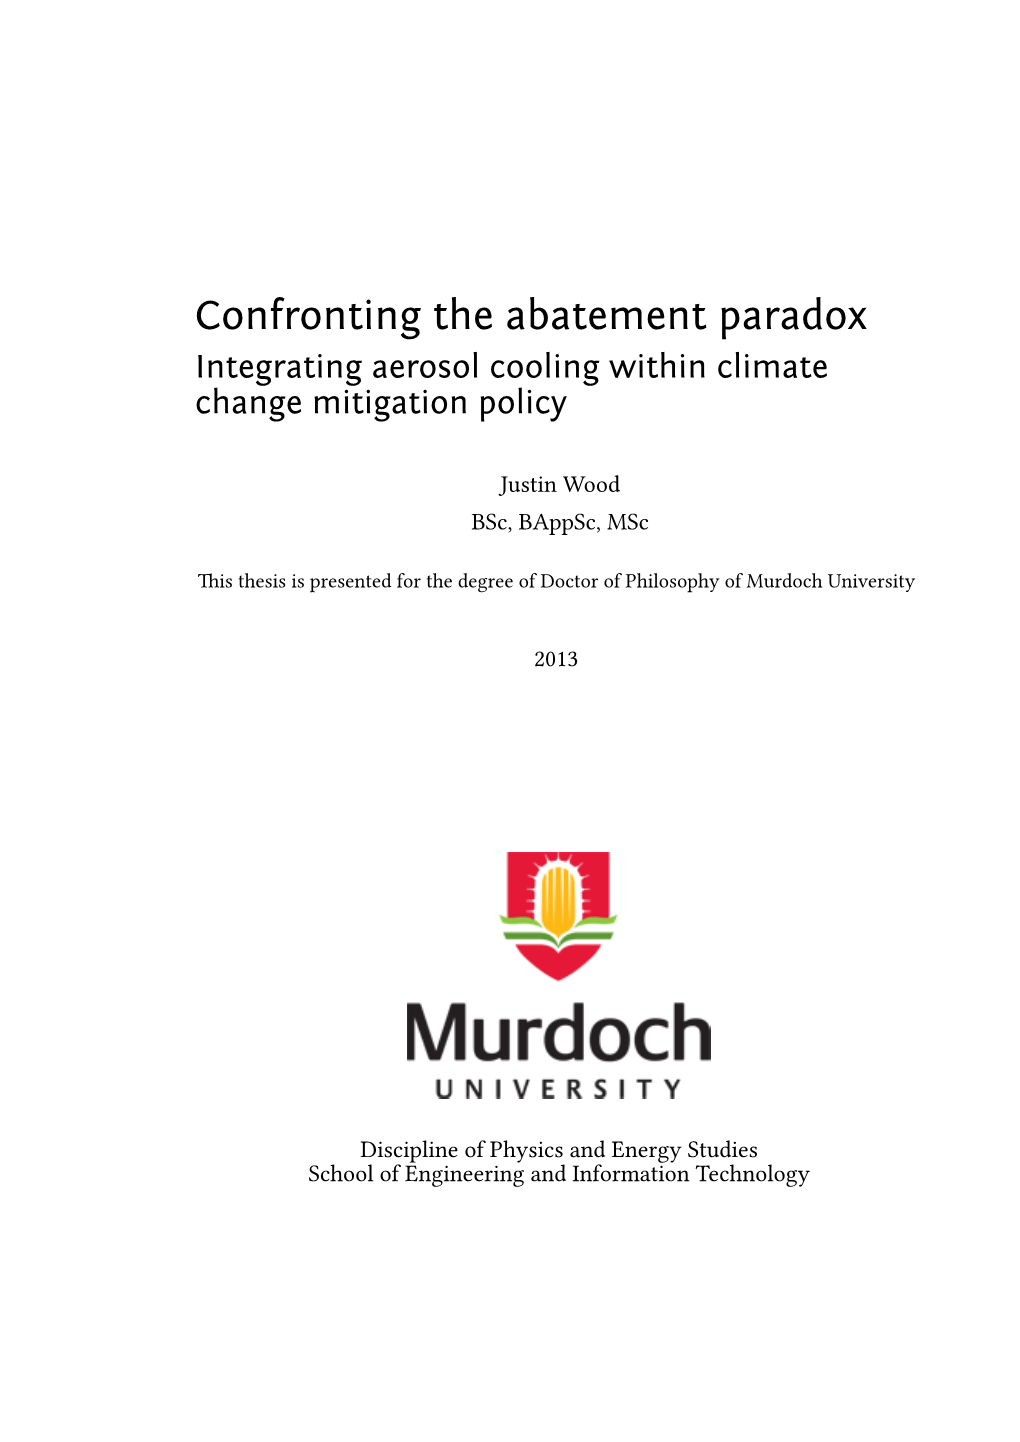 Integrating Aerosol Cooling Within Climate Change Mitigation Policy